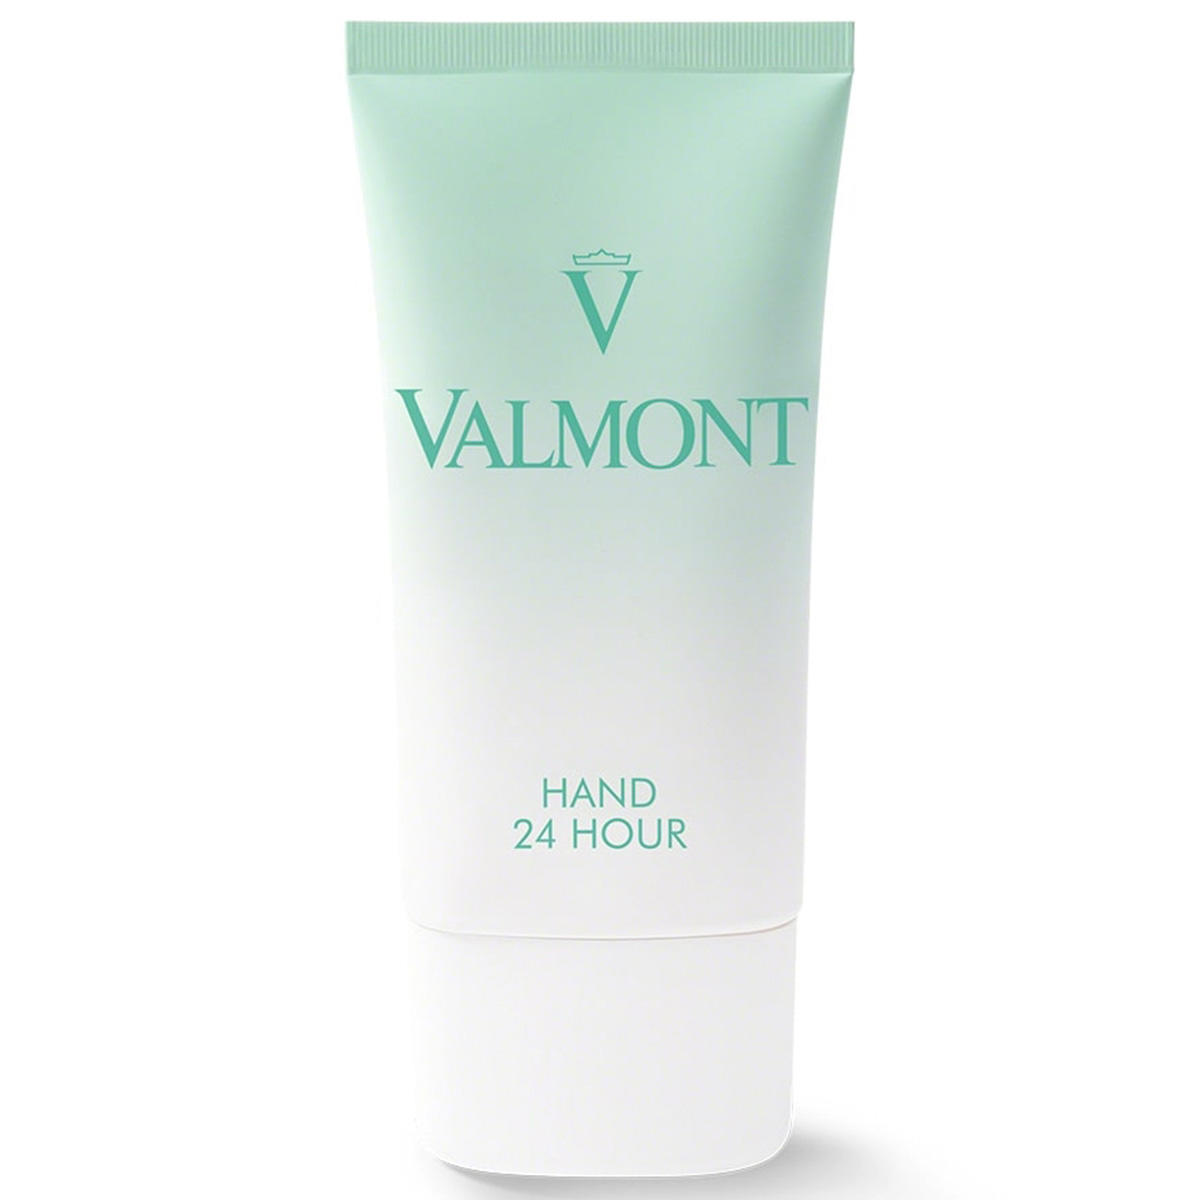 Valmont Hand 24 Hour 75 ml - 1